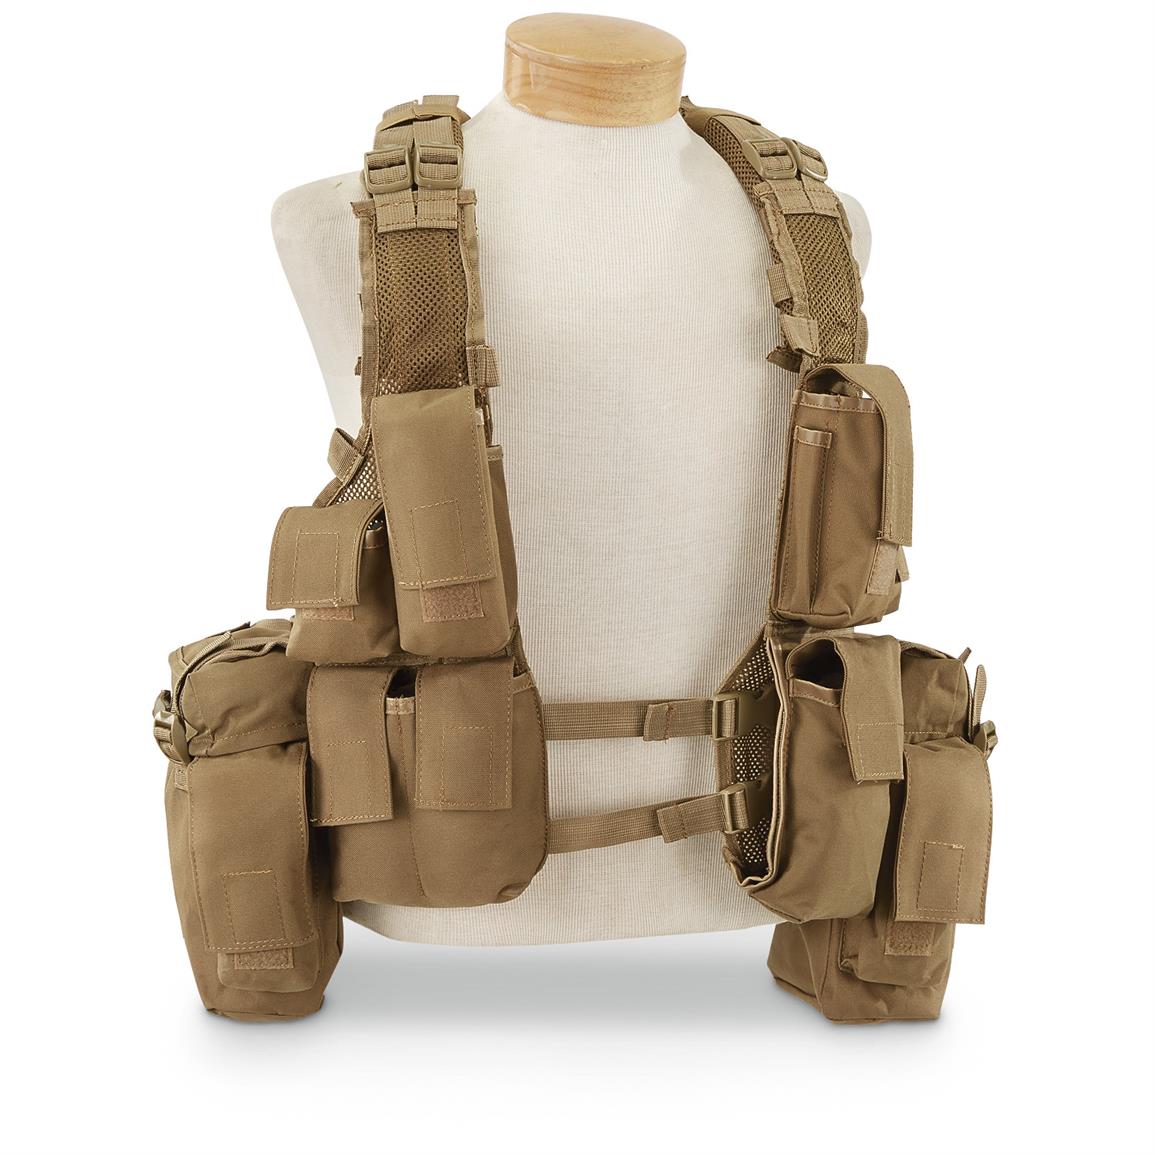 5ive Star Gear 11-pocket Tactical Vest - 651606, Tactical Clothing at ...